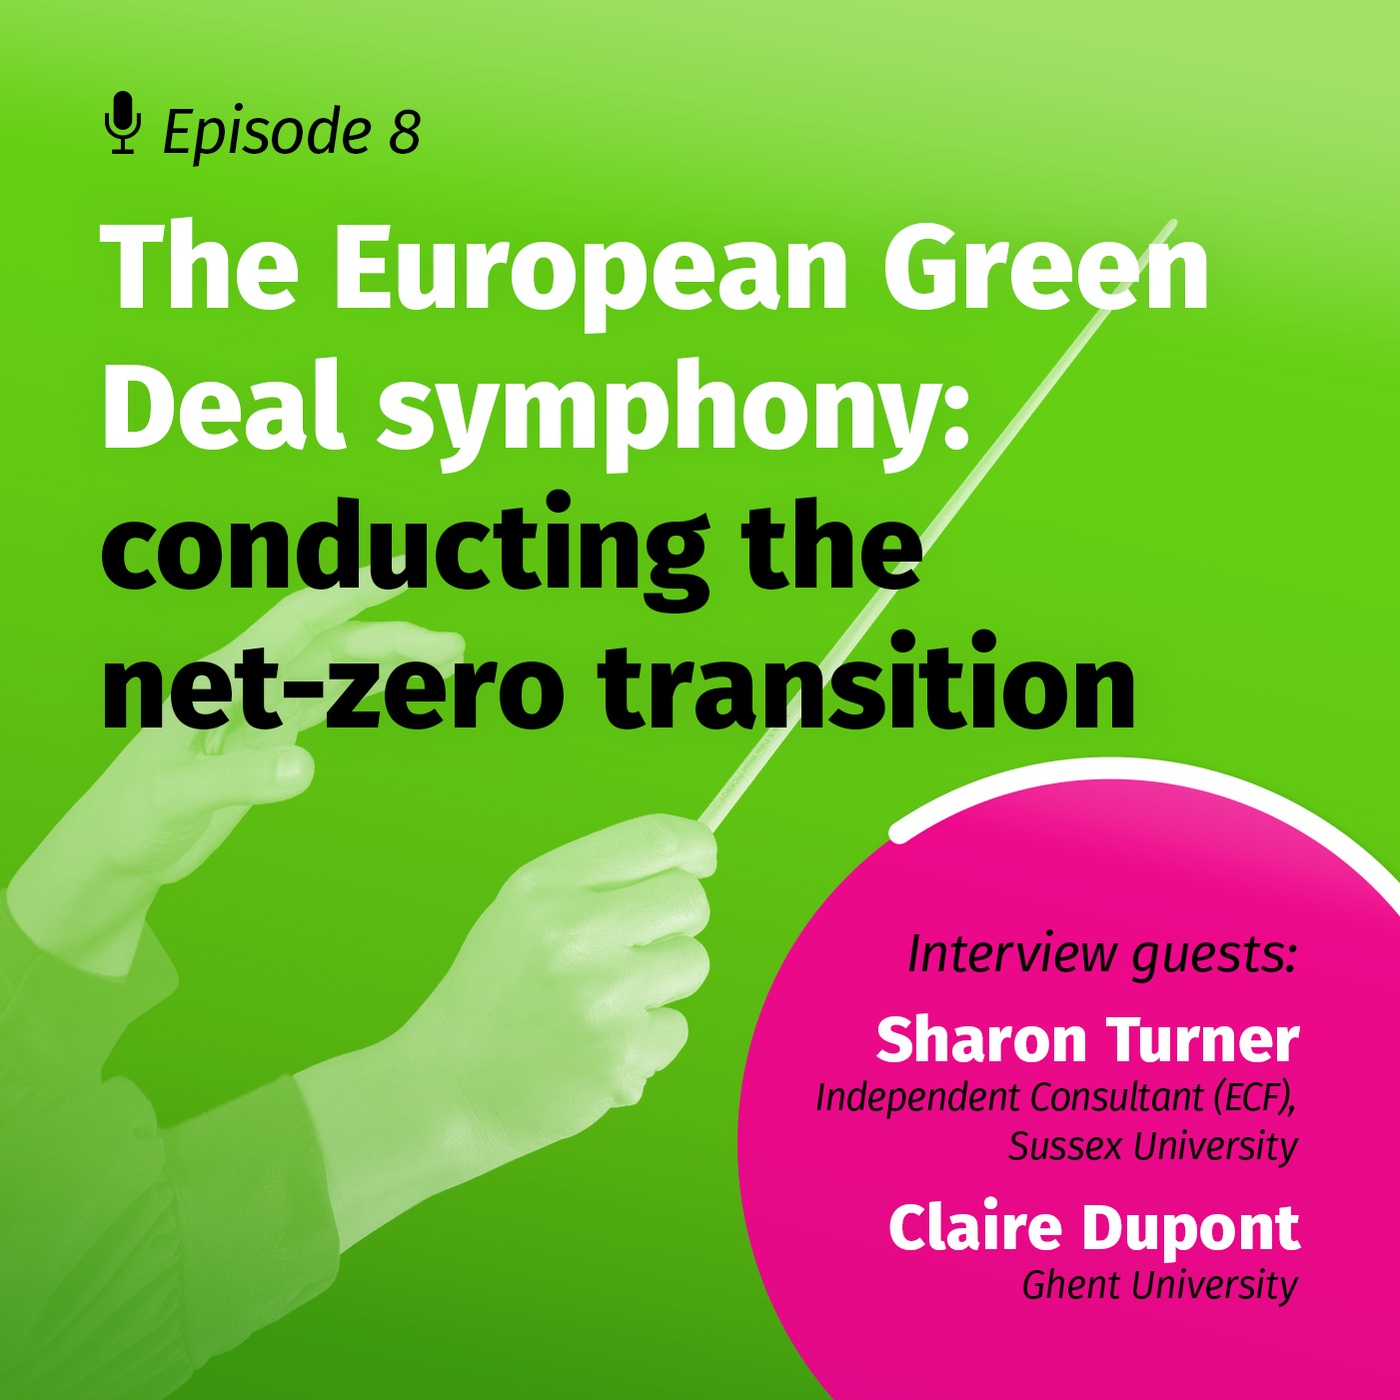 The European Green Deal symphony: conducting the net-zero transition